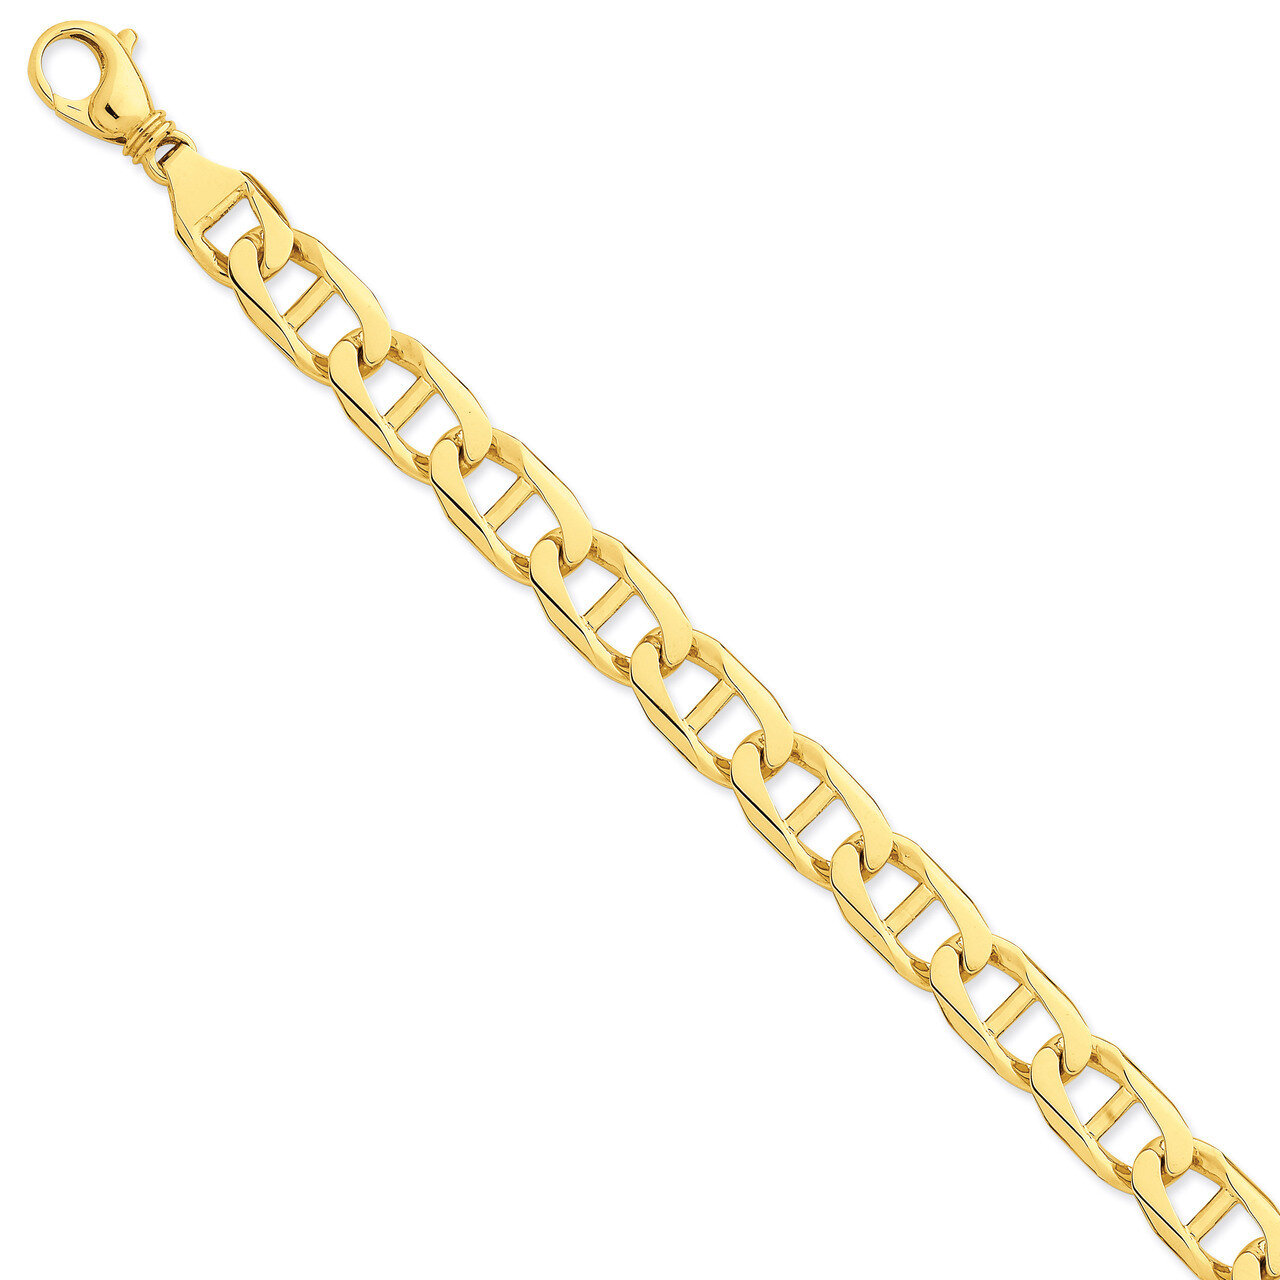 11mm Hand-Polished Anchor Link Chain 22 Inch 14k Gold LK102-22